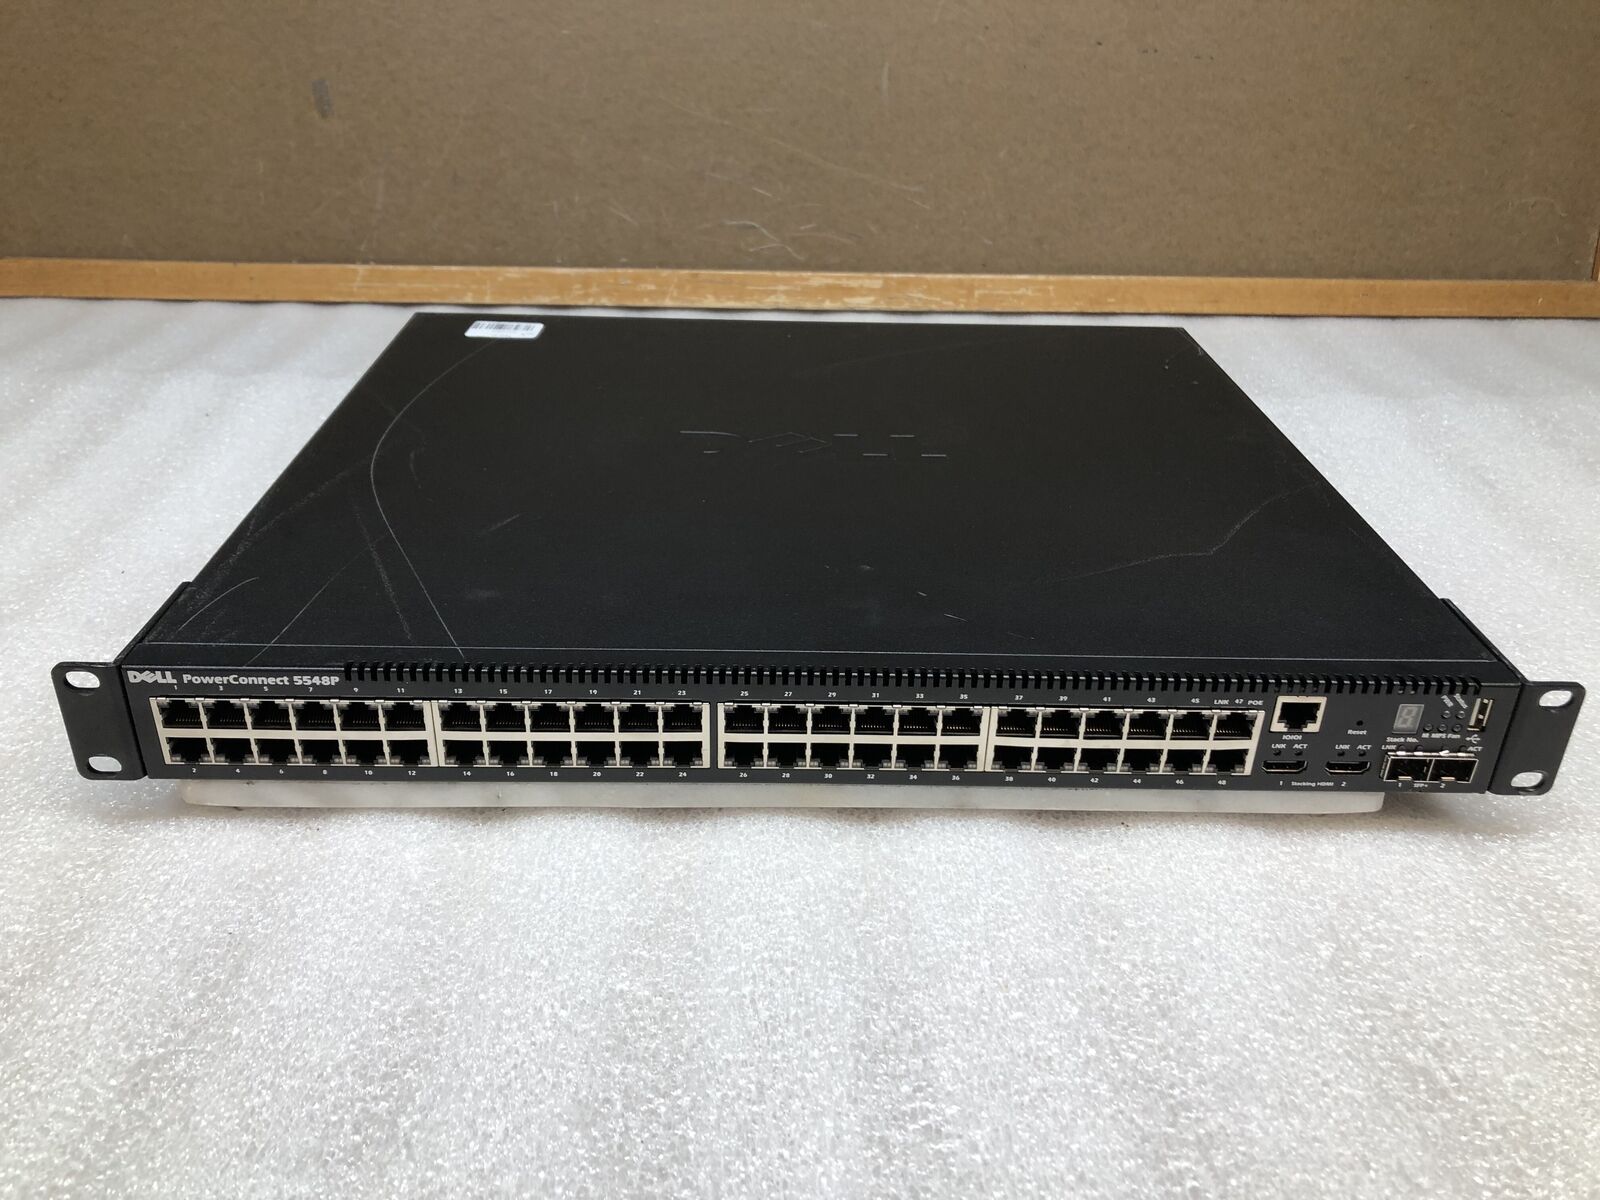 Dell PowerConnect 5548P 48-Port Gbe Ethernet PoE 2xSFP+ Network Switch